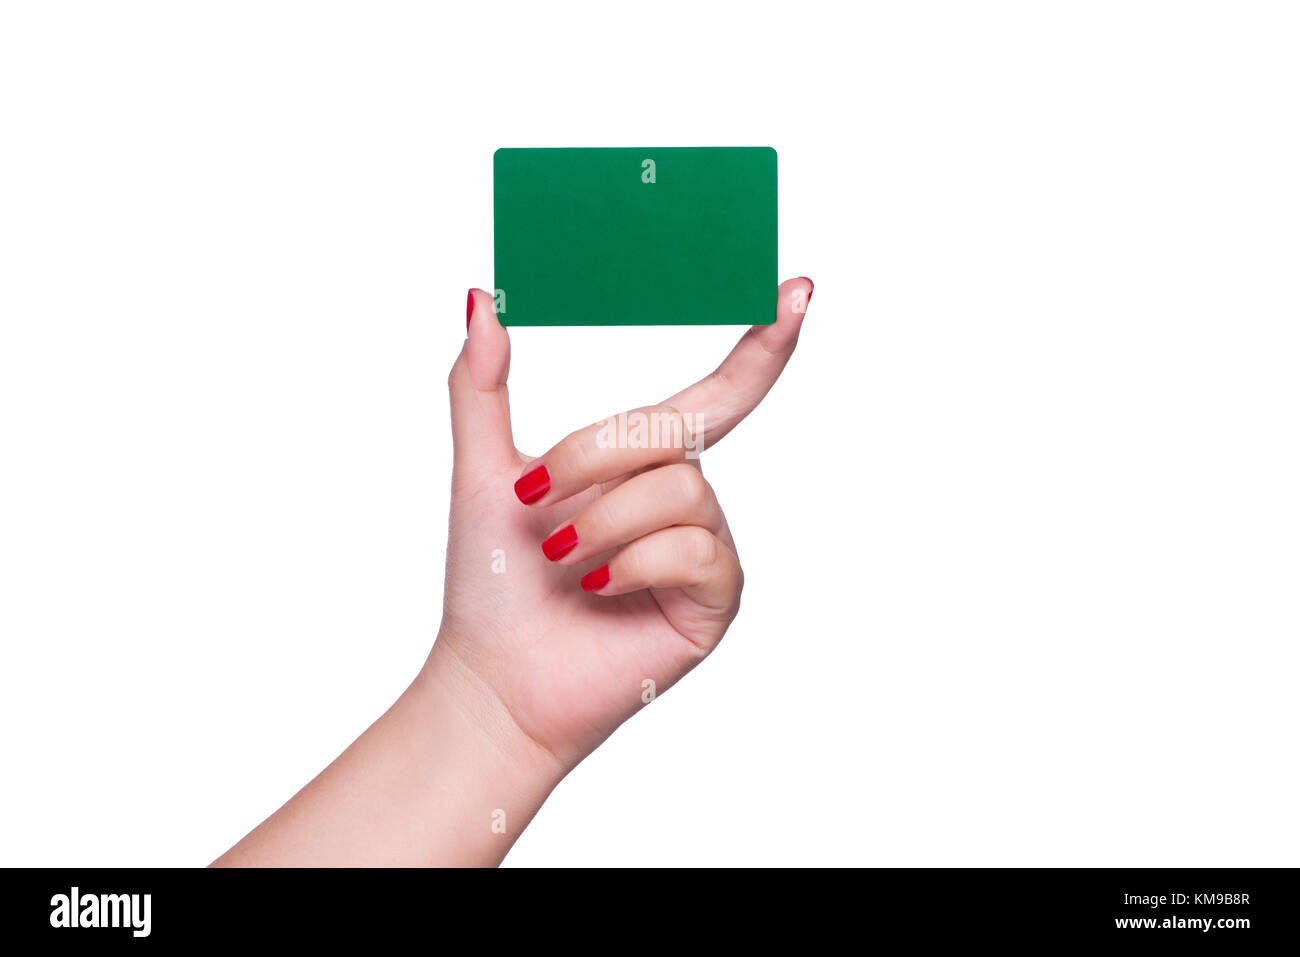 Woman's hand holding blank green card isolated on white. Stock Photo